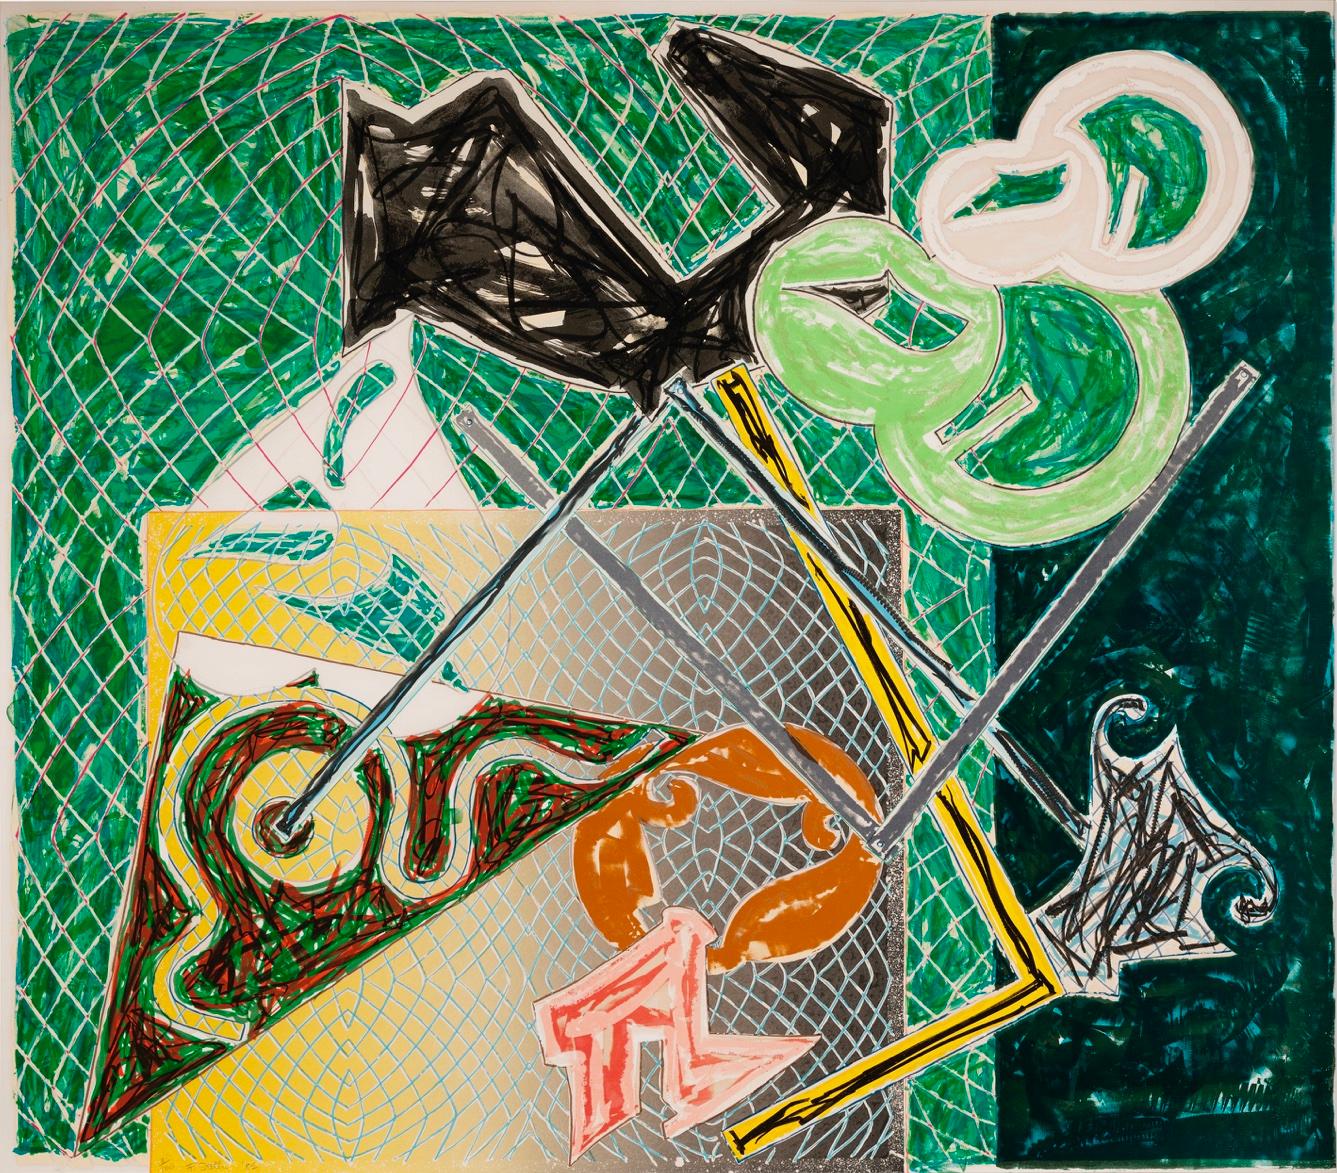 FRANK STELLA (1936-Present)

Frank Stella's 'Shards V' is a 1982 screenprint and lithograph in colours on Arches paper. It is signed, dated and numbered to lower edge ‘81/100 F. Stella 82’. This piece is number 81 from the edition of 100 published